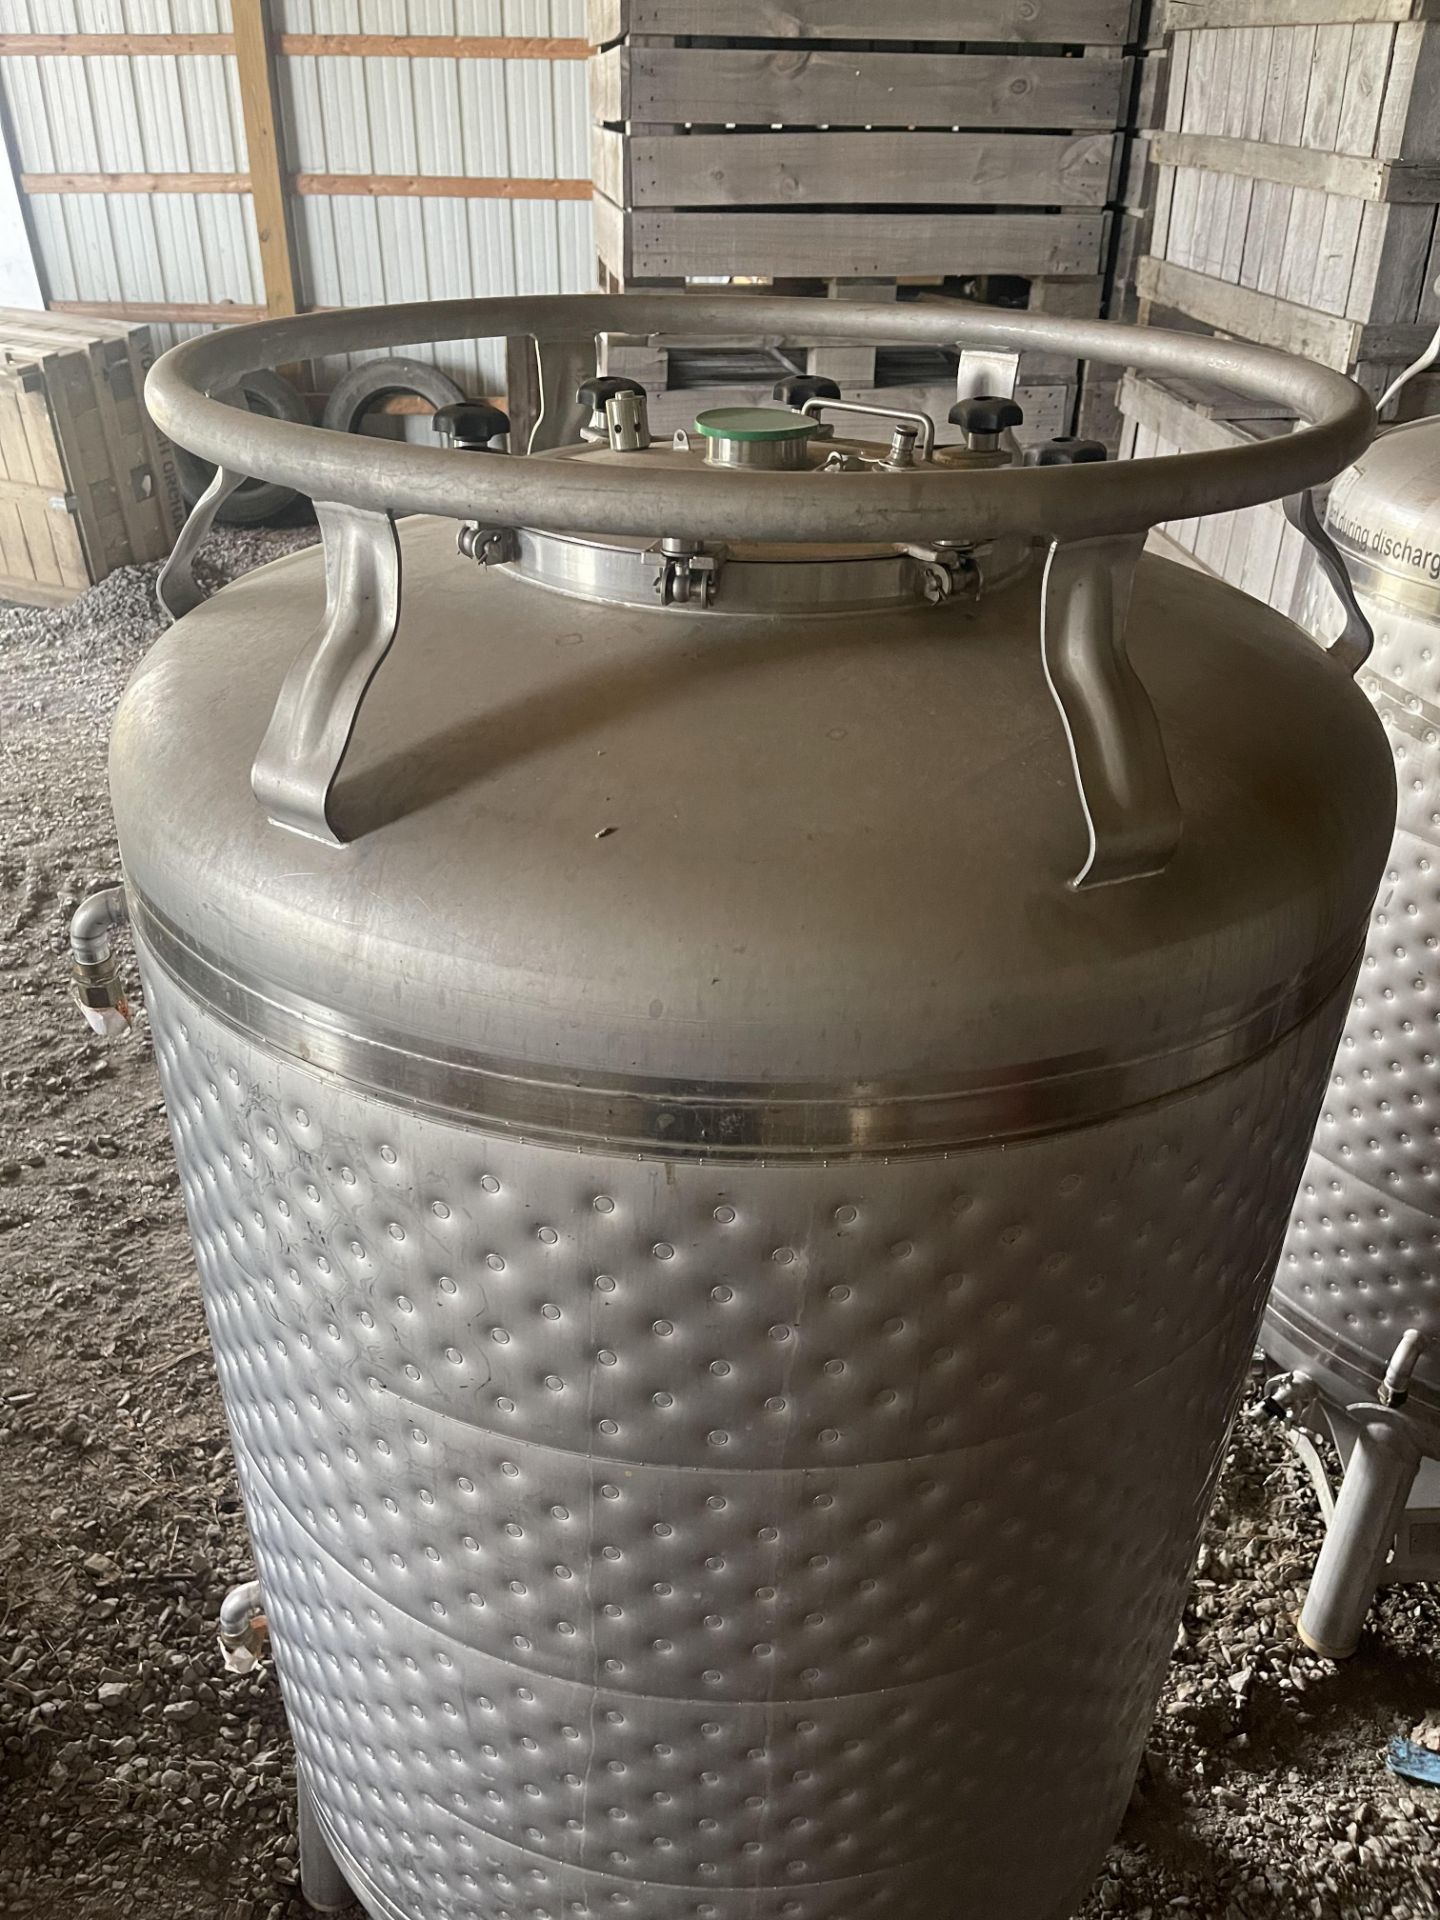 7 BBL Stainless Steel Grundy Tank, Dimple Jacketed | Rig Fee $500 - Image 2 of 2